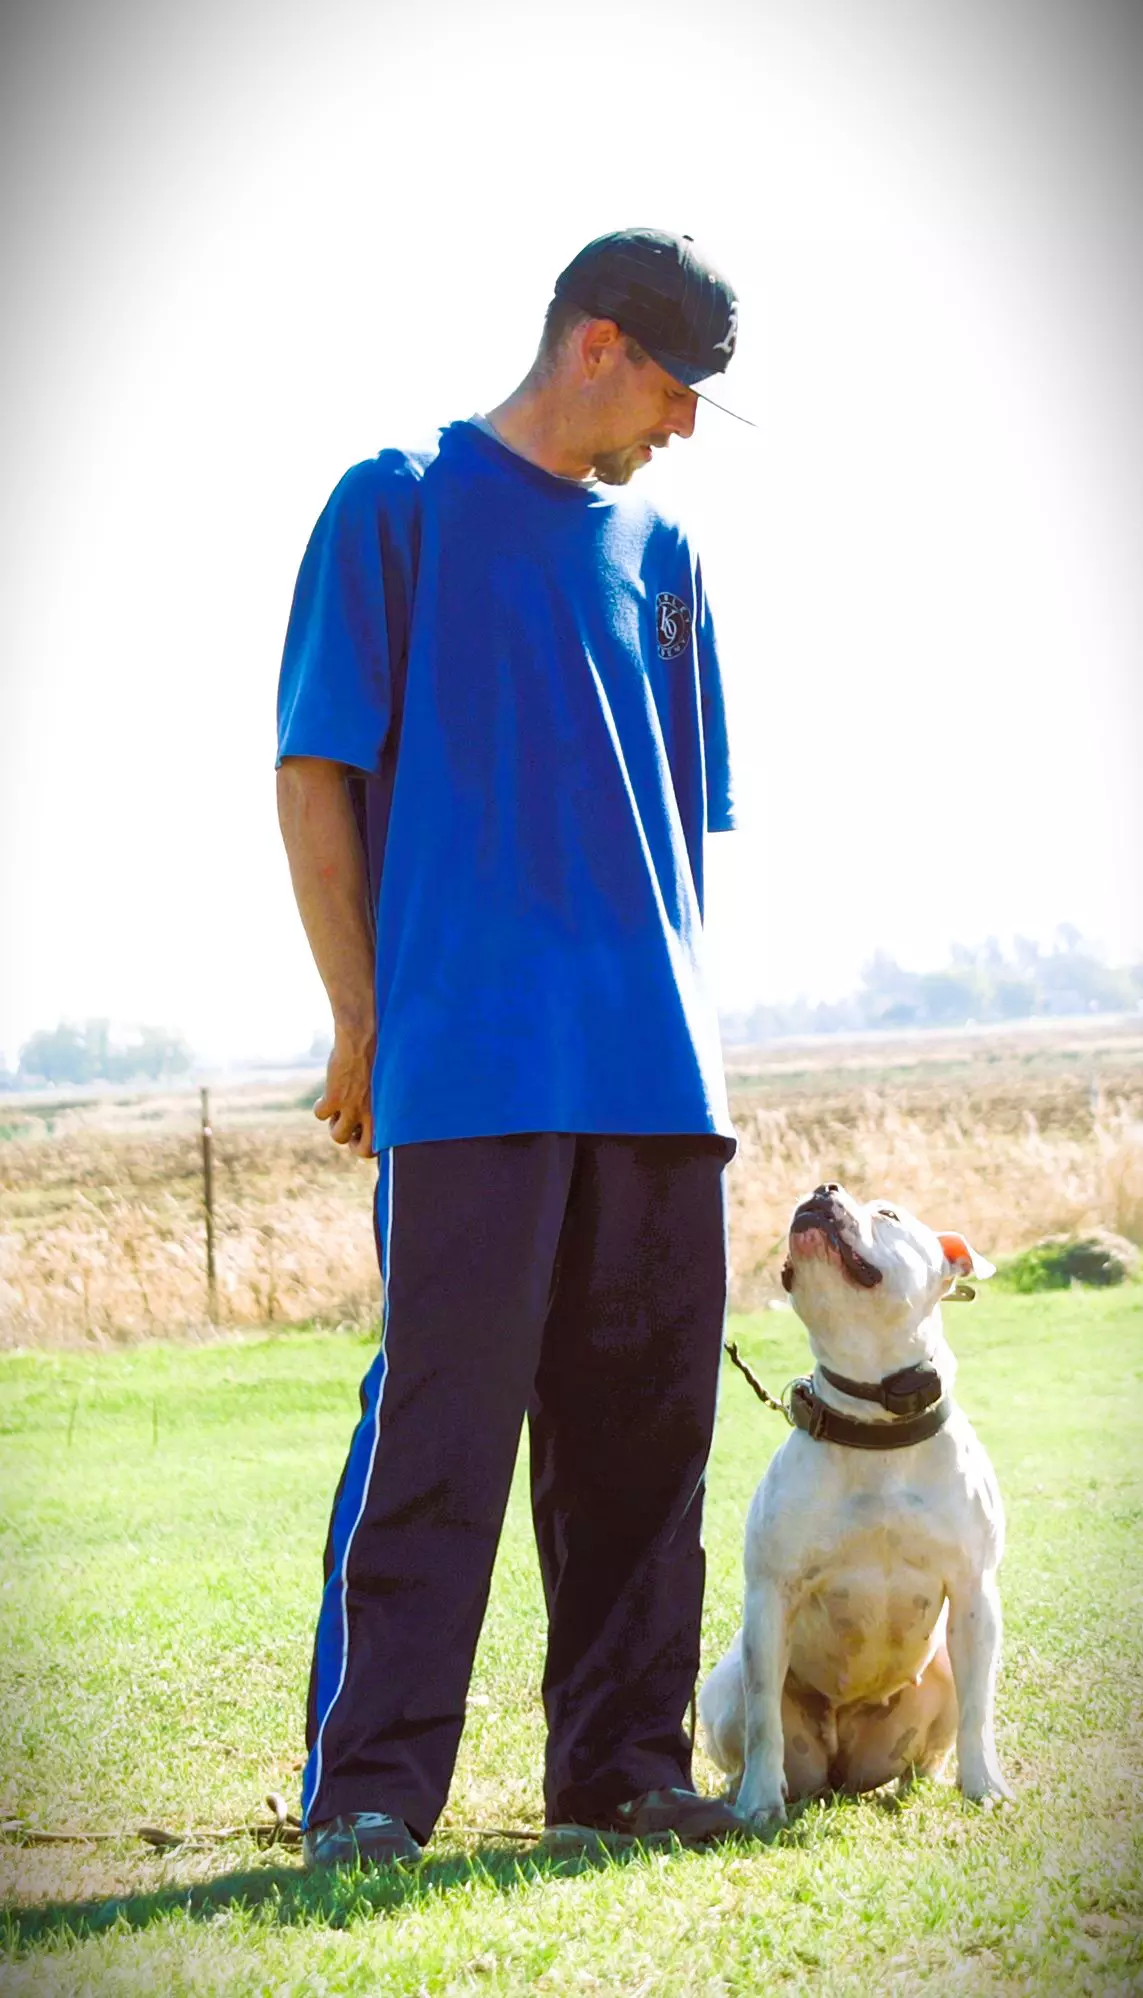 Man in blue shirt with pitbull looking up.